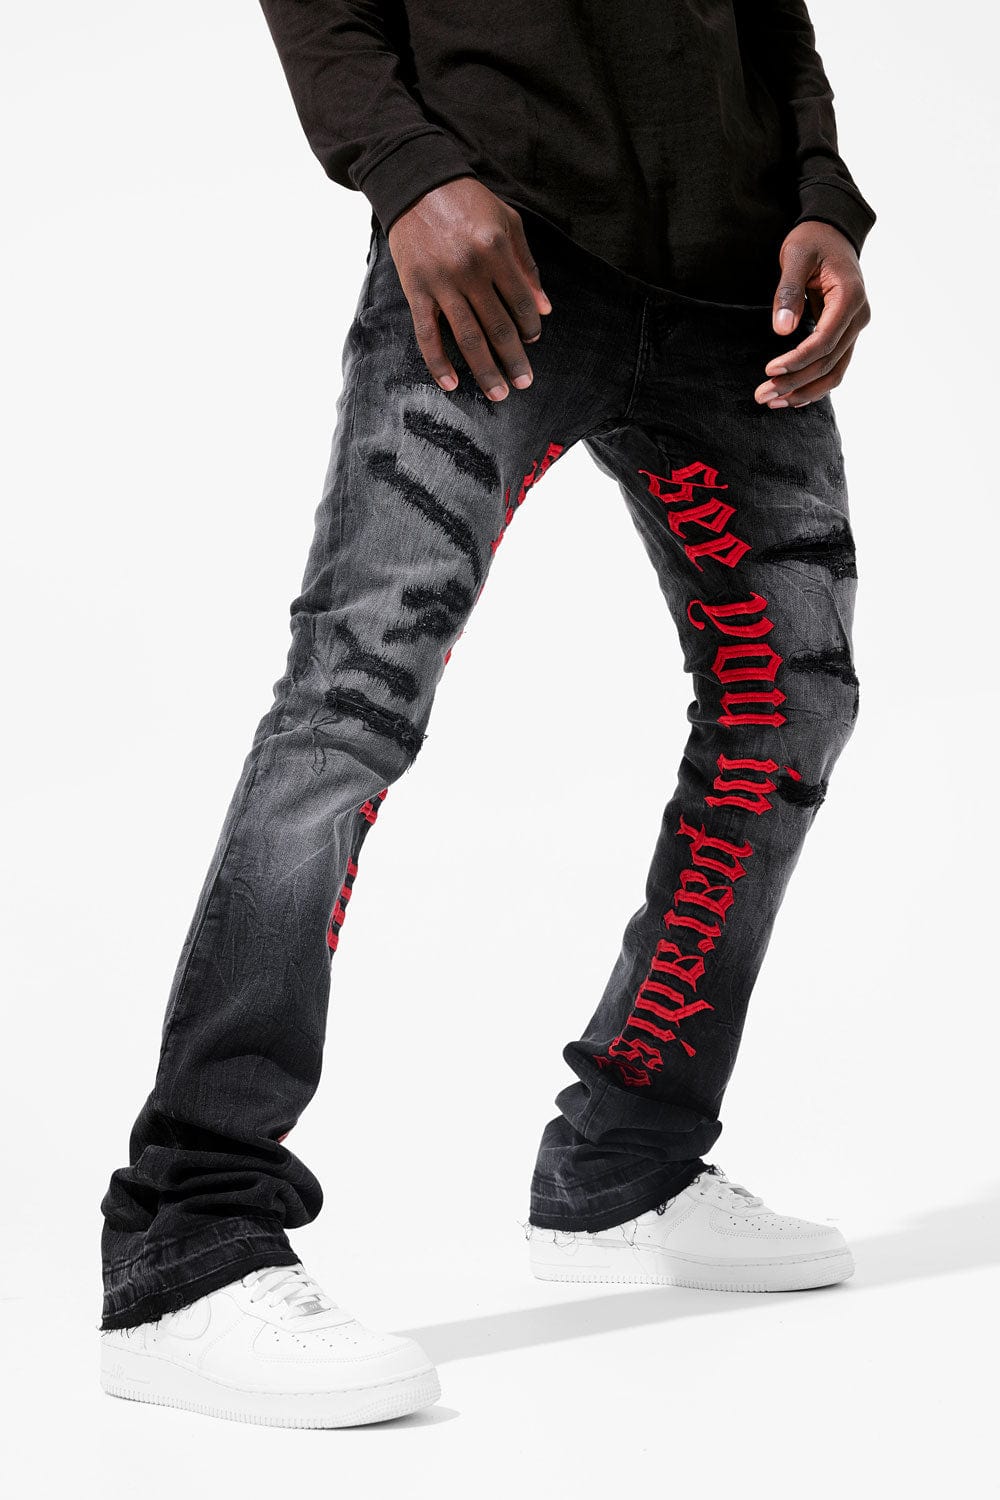 Martin Stacked - See You In Paradise Denim Jeans - Black Shadow